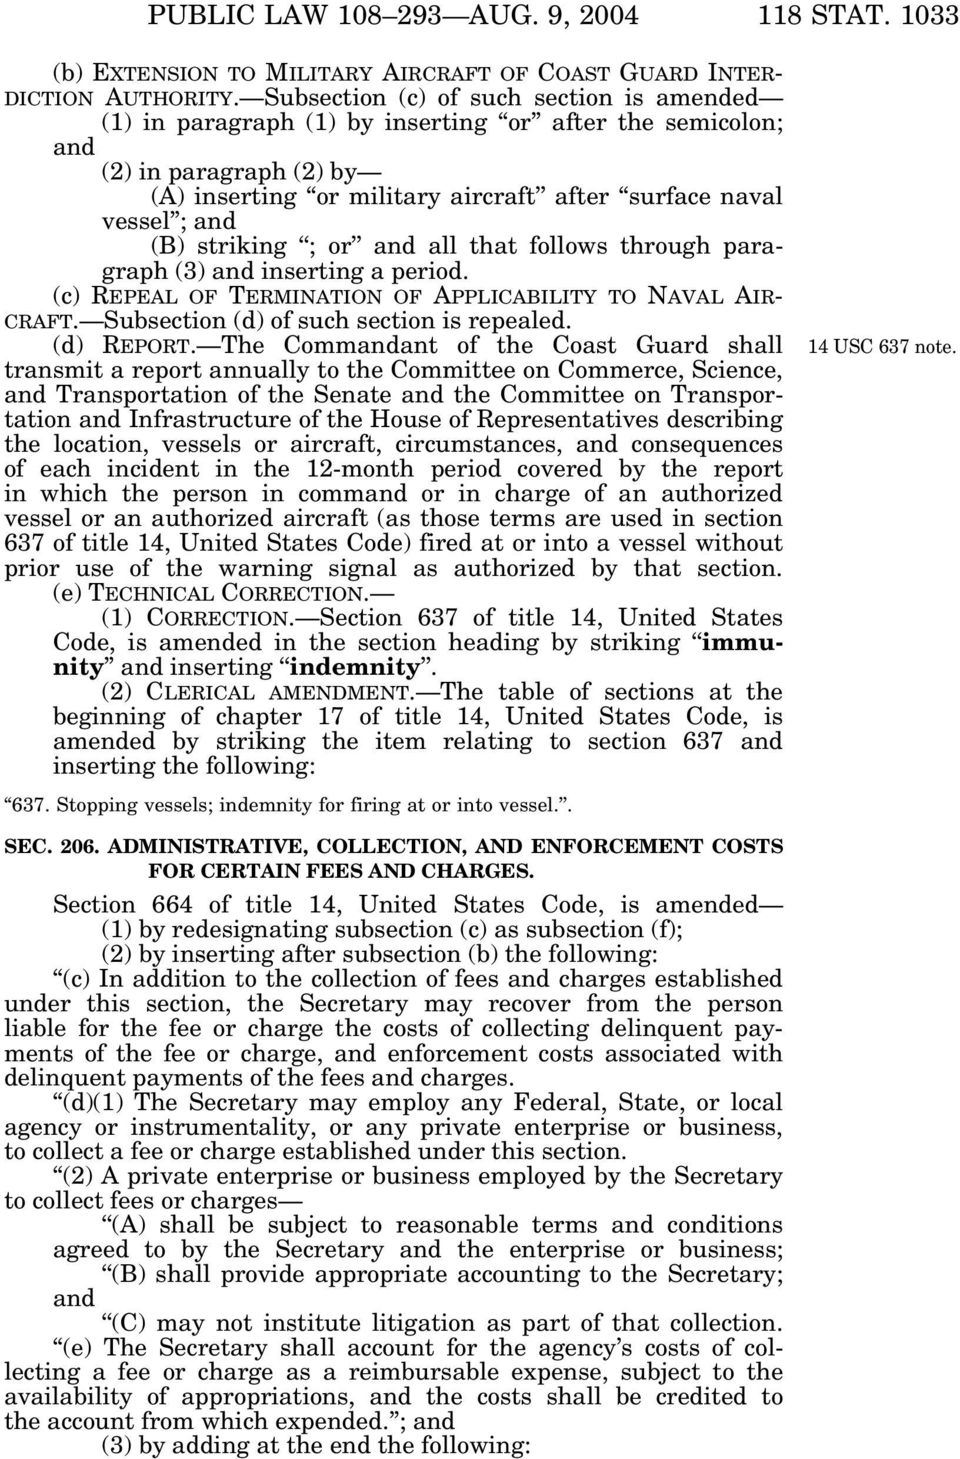 striking ; or and all that follows through paragraph (3) and inserting a period. (c) REPEAL OF TERMINATION OF APPLICABILITY TO NAVAL AIR- CRAFT. Subsection (d) of such section is repealed. (d) REPORT.